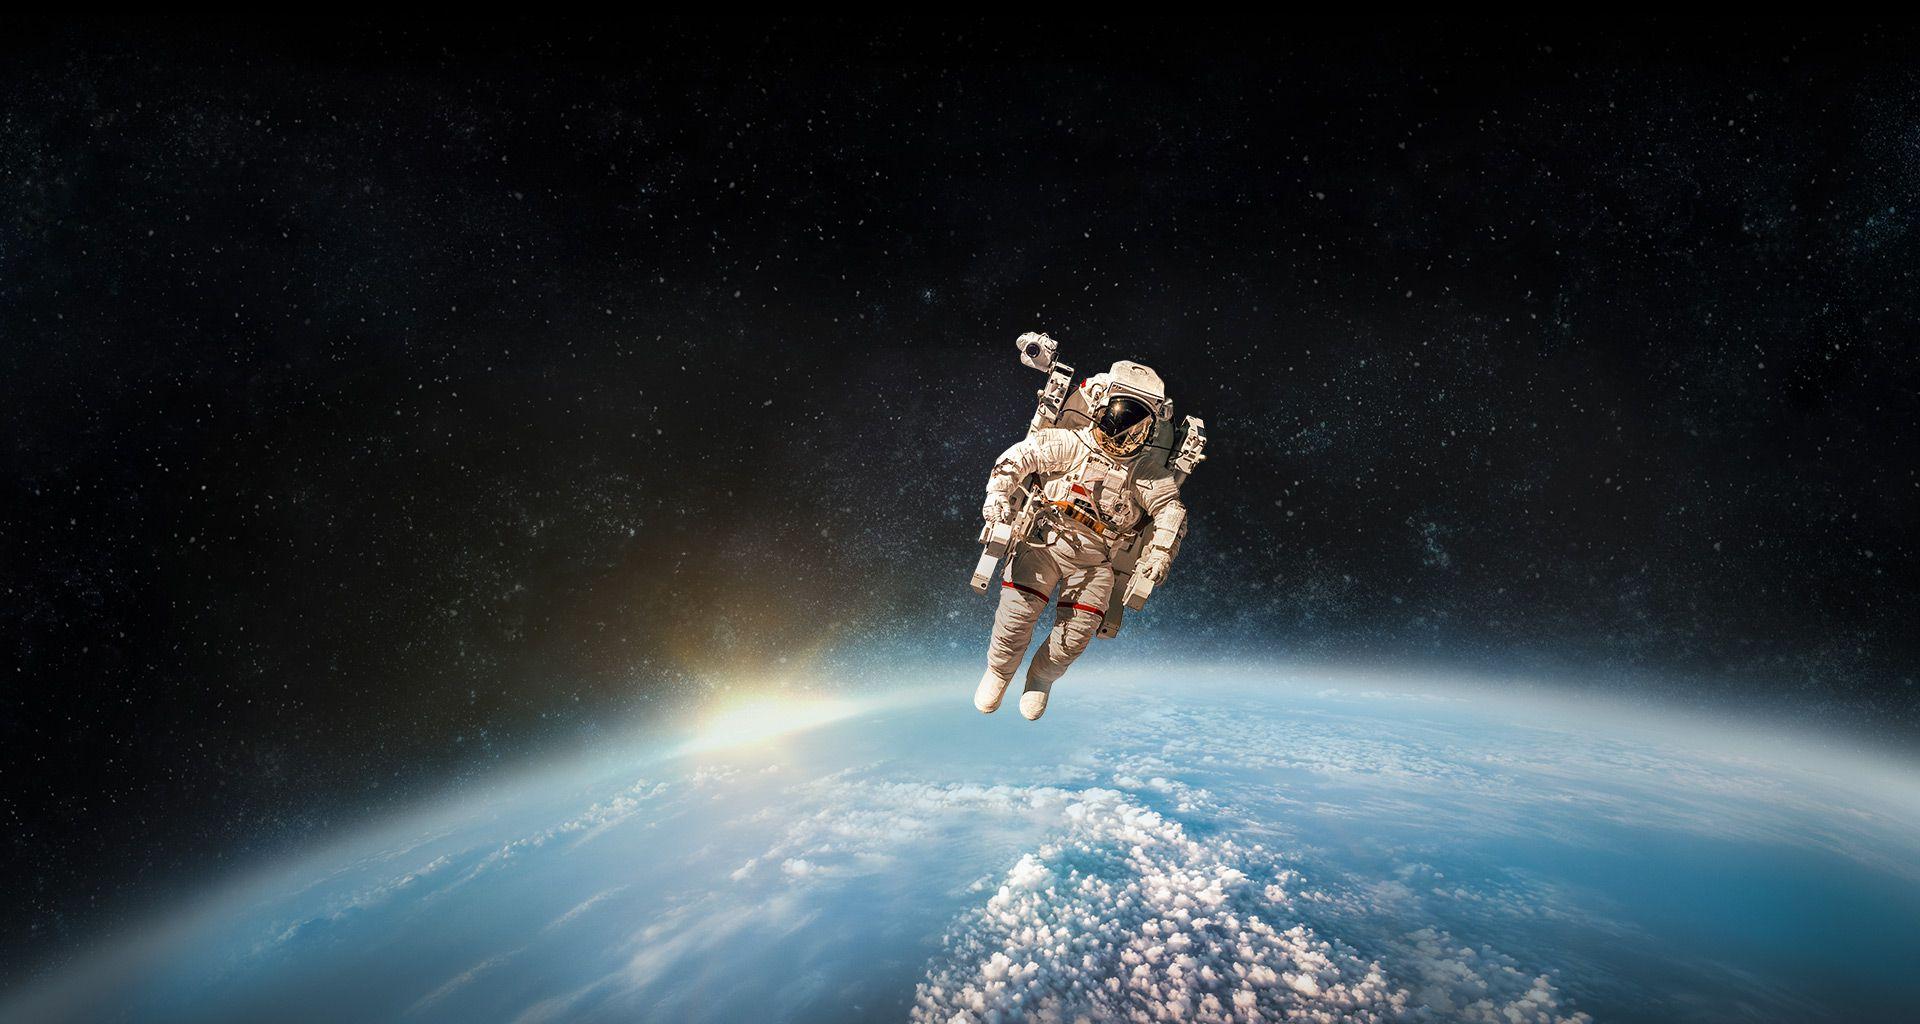 Astronaut Galaxy Wallpapers - Top Free Astronaut Galaxy Backgrounds